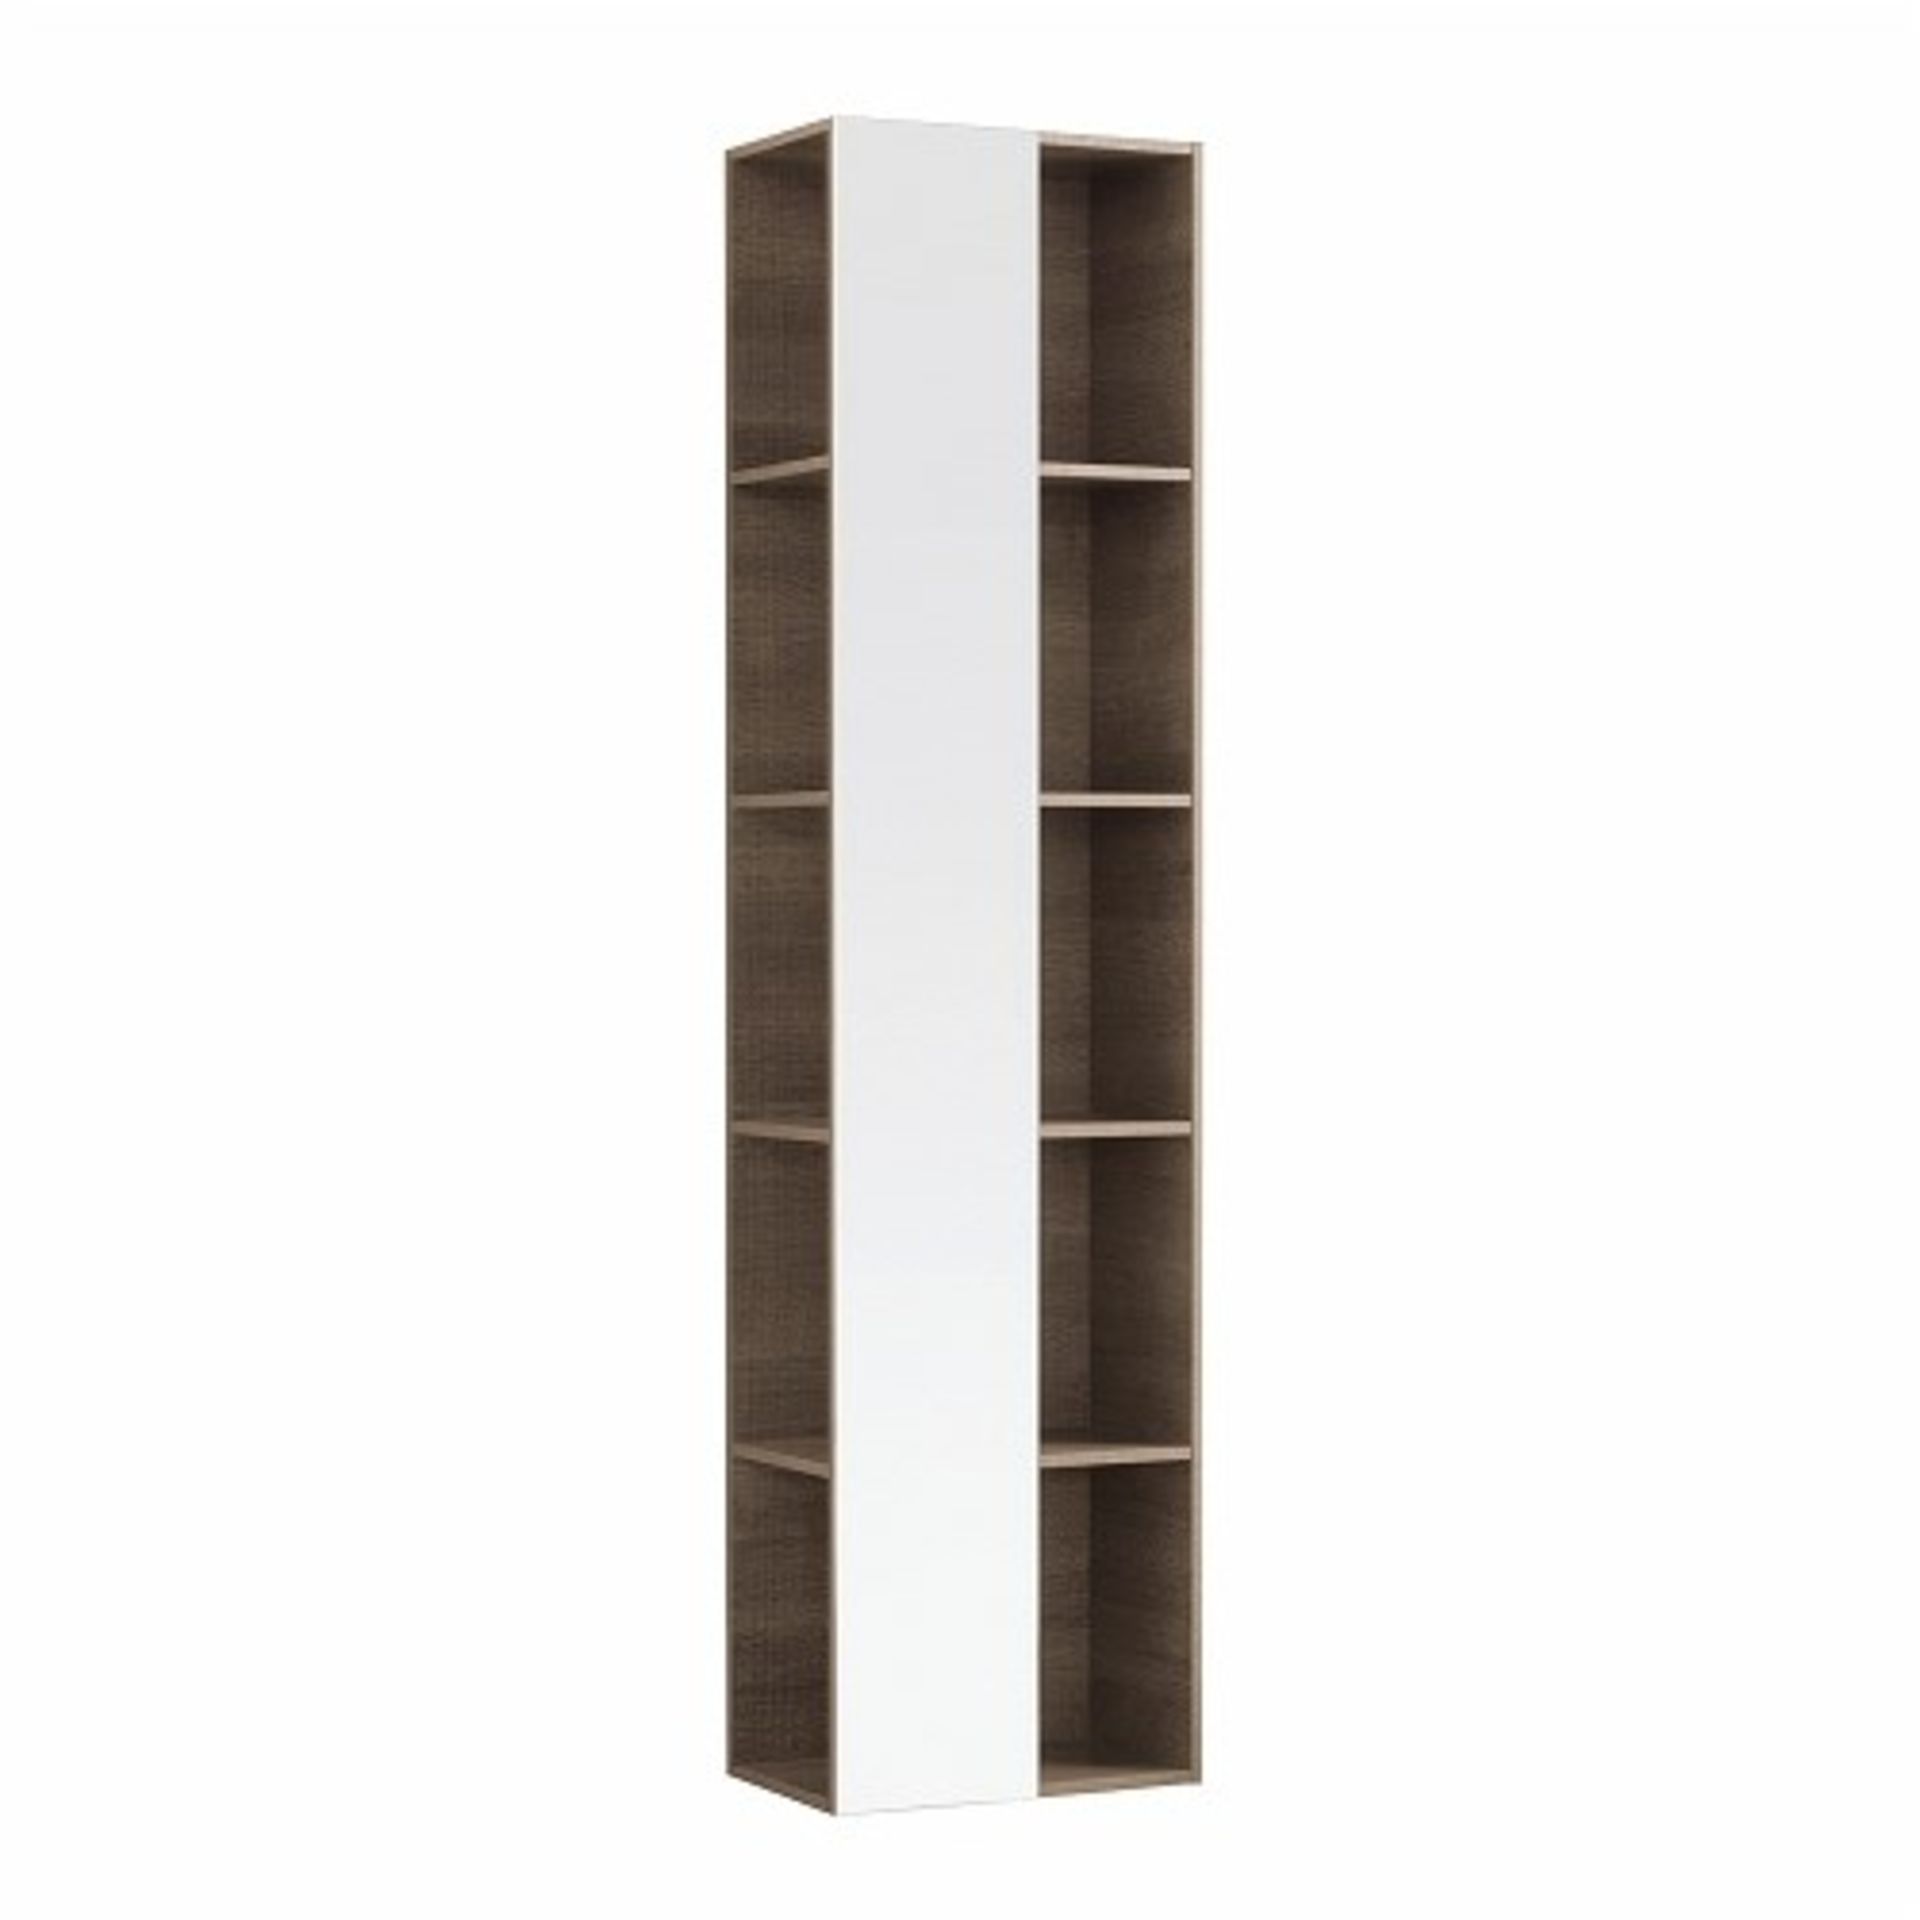 (PC4) 1600mm Keramag Citterio Grey/Brown Shelves with Mirror Tall Cabinet. RRP £865.99.Wood st...( - Image 3 of 4